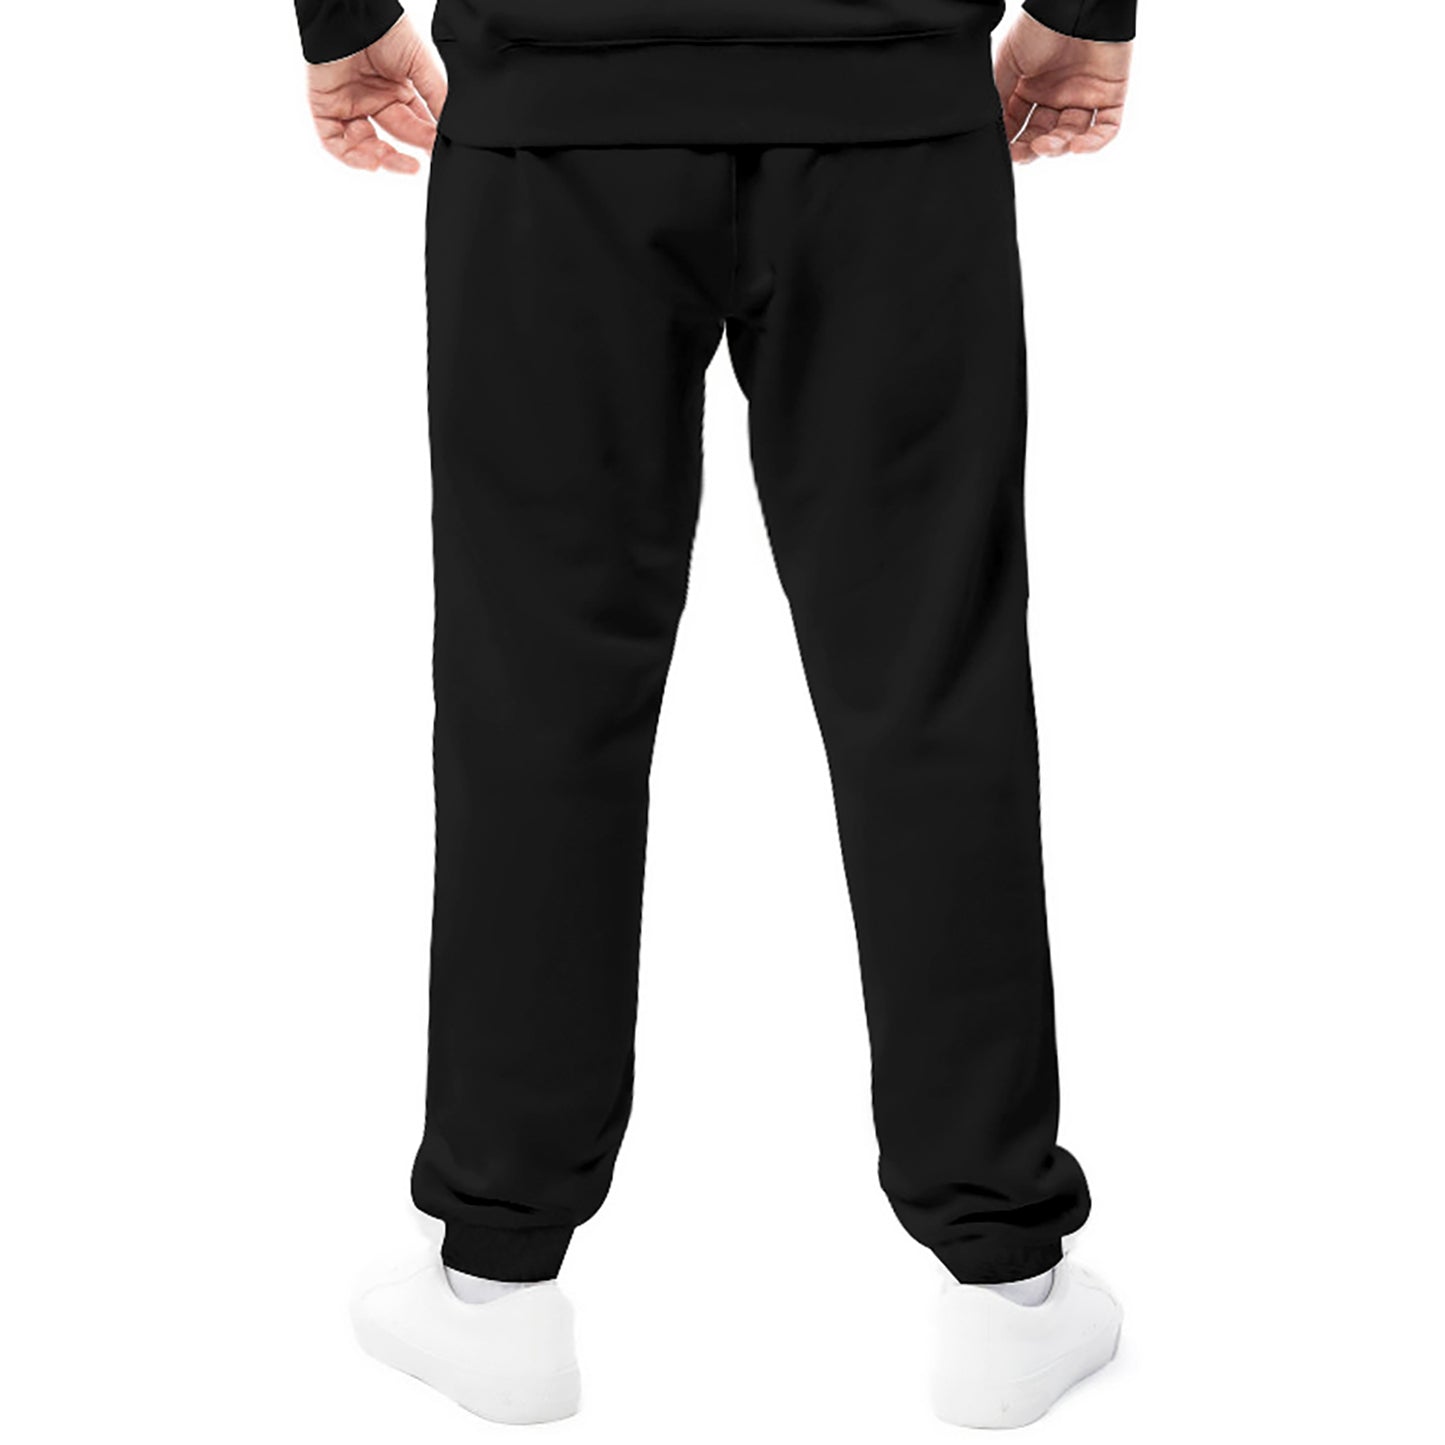 Add an Image 180gsm White or Black Sweatpants-XS to 3XL